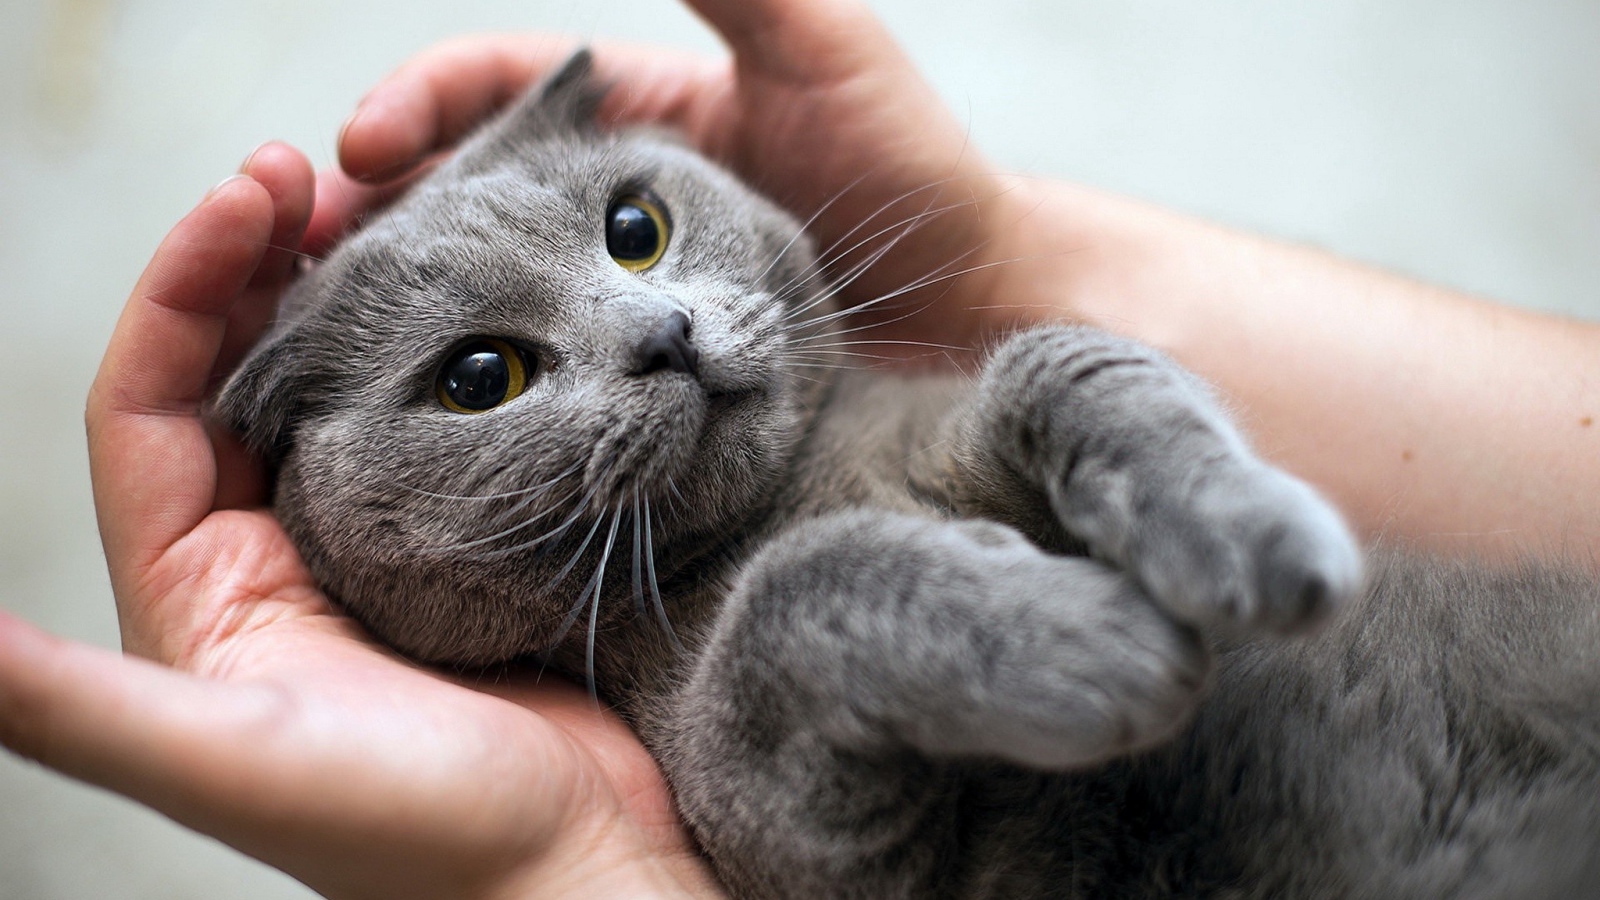 A gray British cat rests on the hands of a man